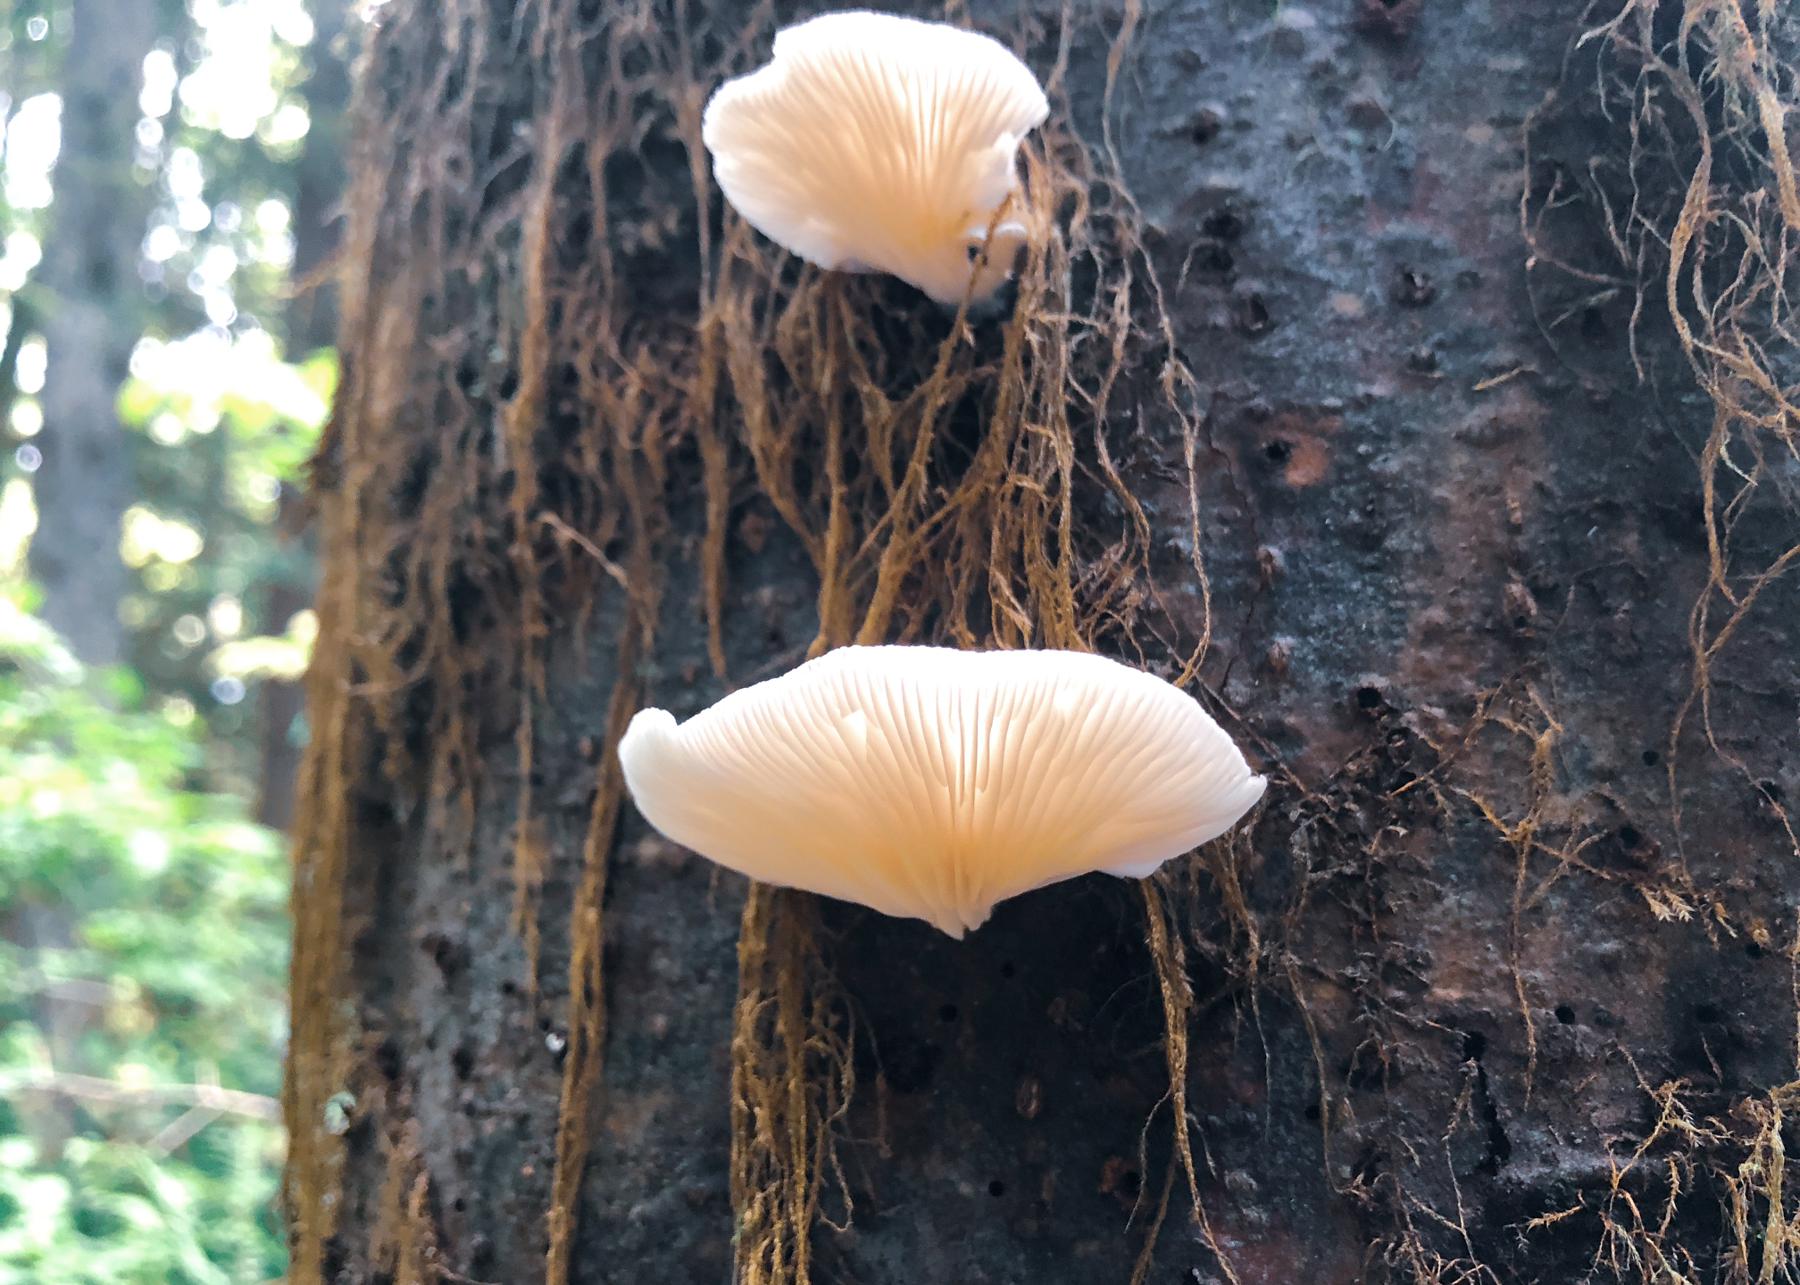 clamshell-looking fungi on a tree trunk